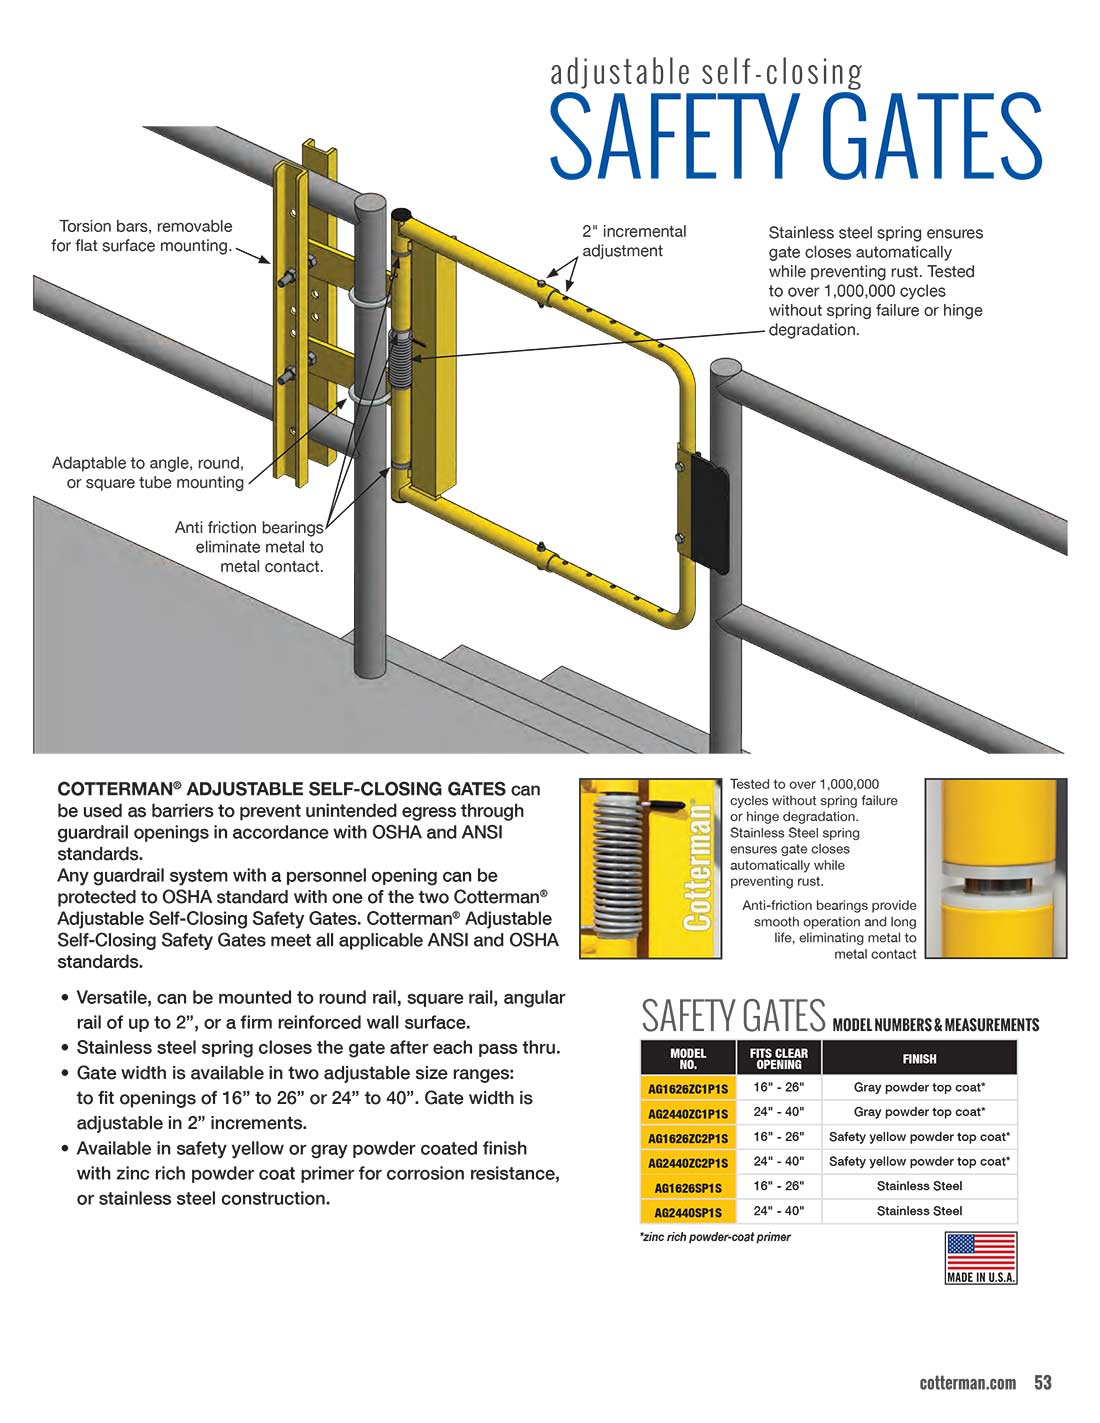 Cotterman Safety Gate Technical Specs